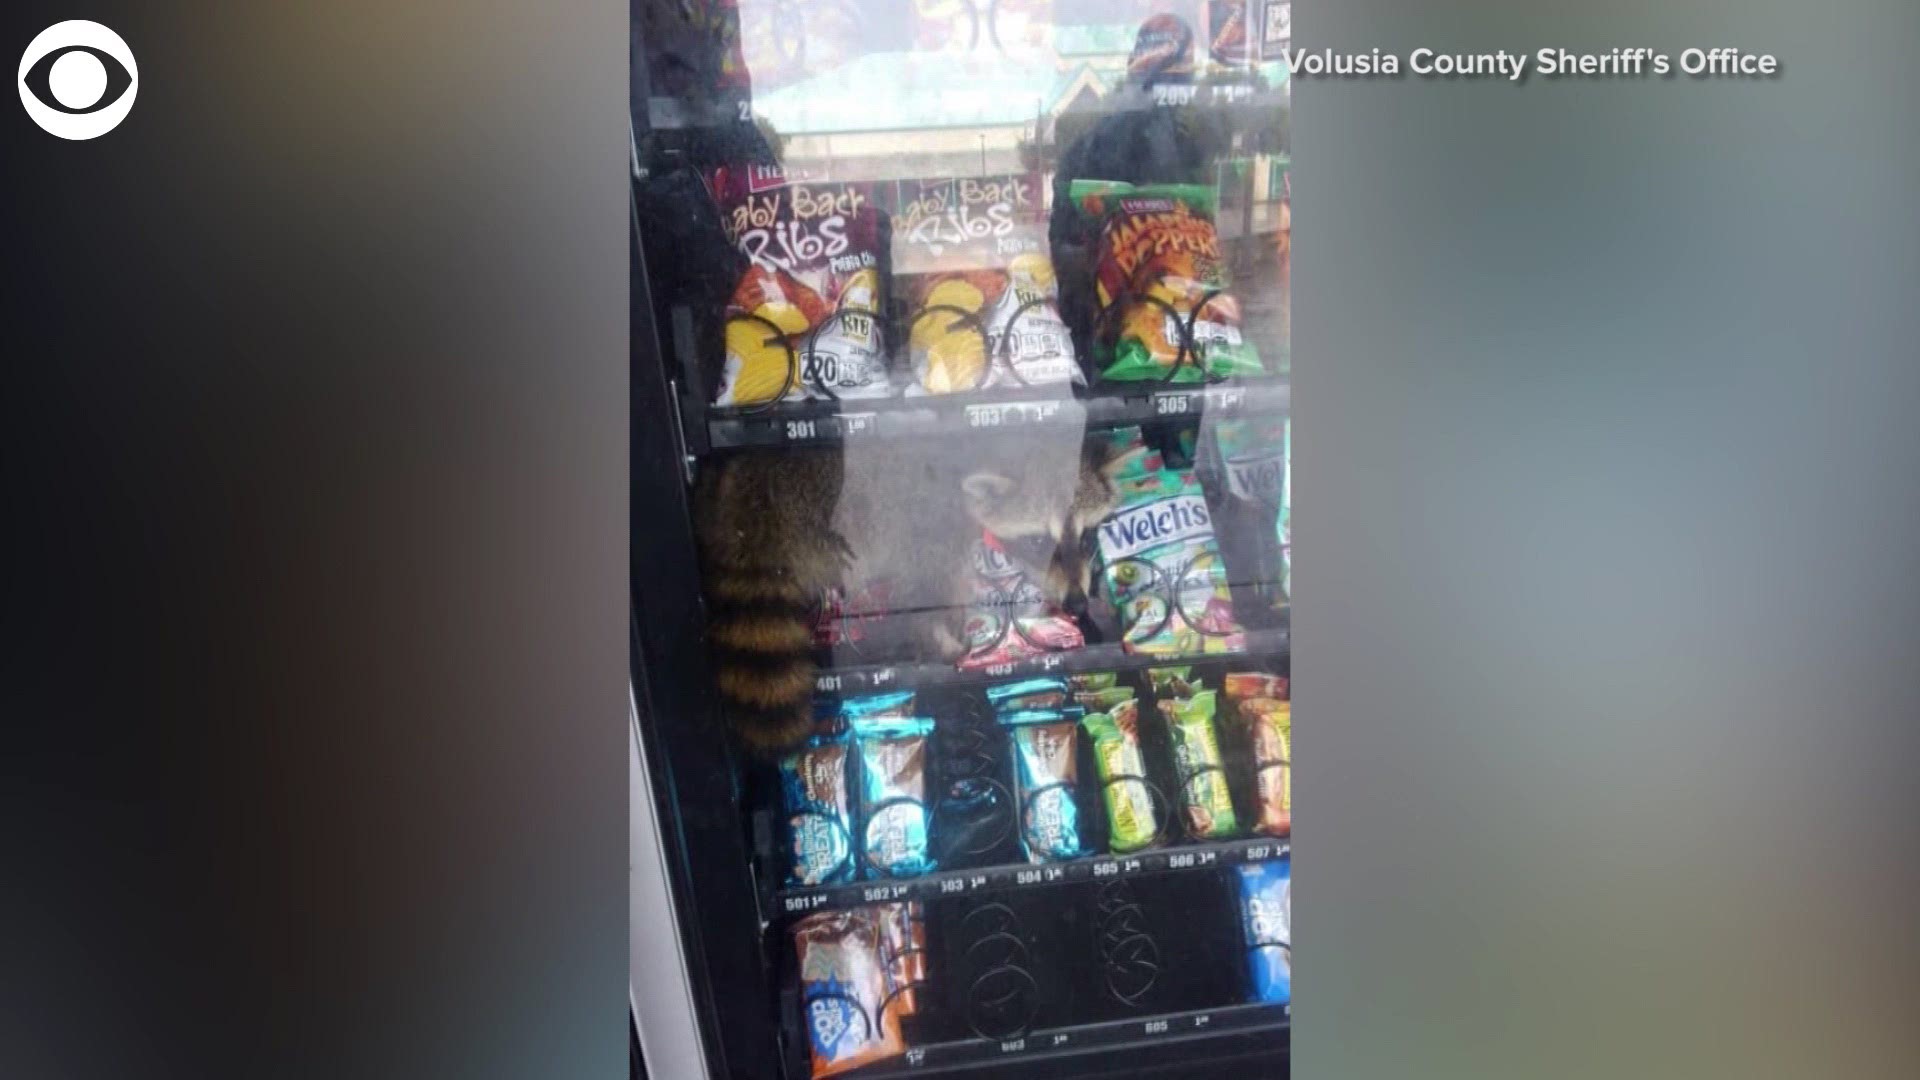 The Volusia County Police in Florida were called to Pine Ridge High School about a theft in progress Wednesday. The thief was a raccoon stuck in a vending machine. Animal control and a vending machine operator were called to free the snack bandit. The vending machine was rolled out of the building and the raccoon scampered to freedom.